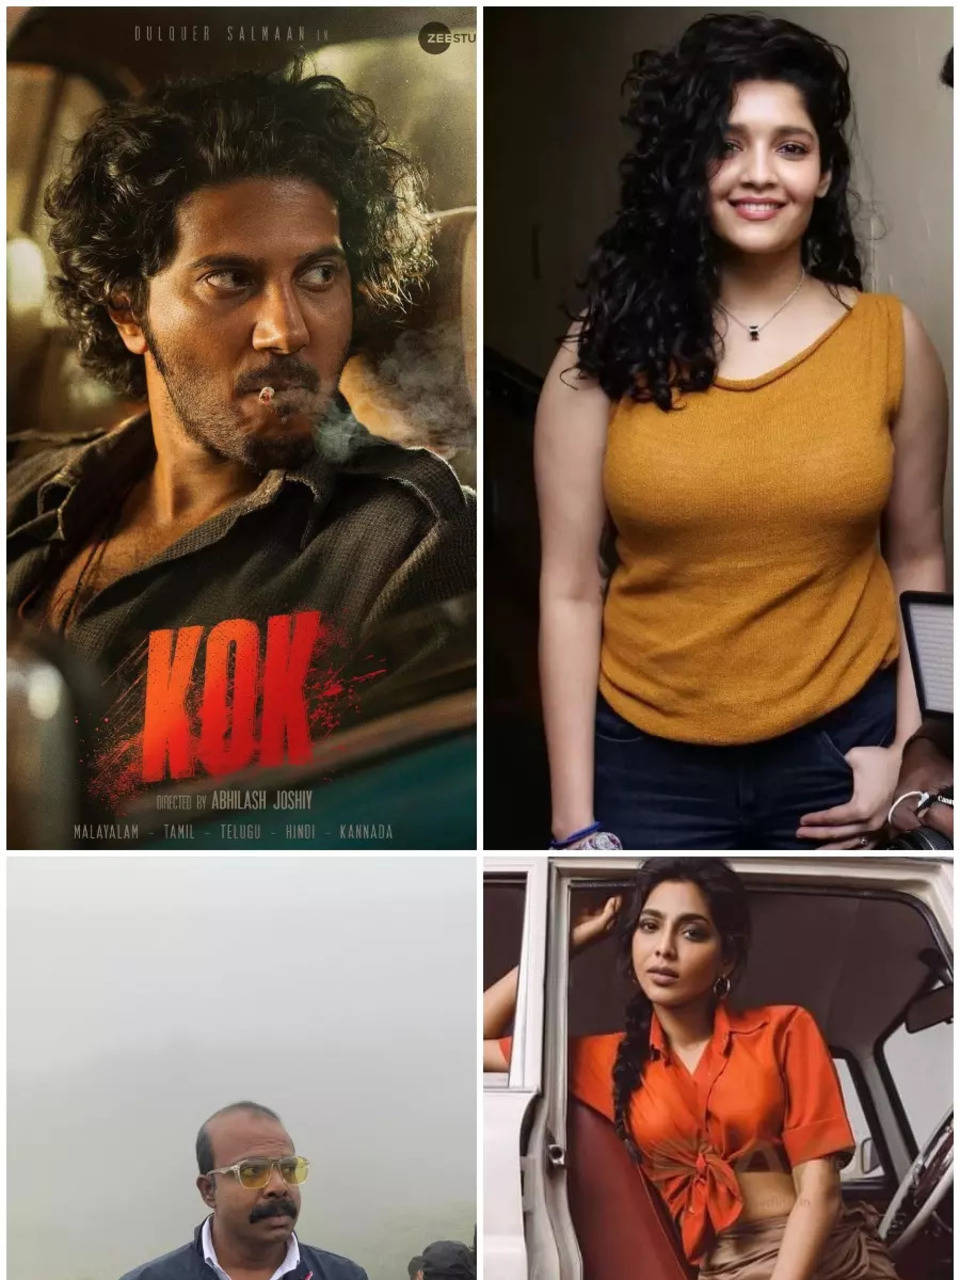 King of Kotha': Meet the cast of the Dulquer Salmaan starrer